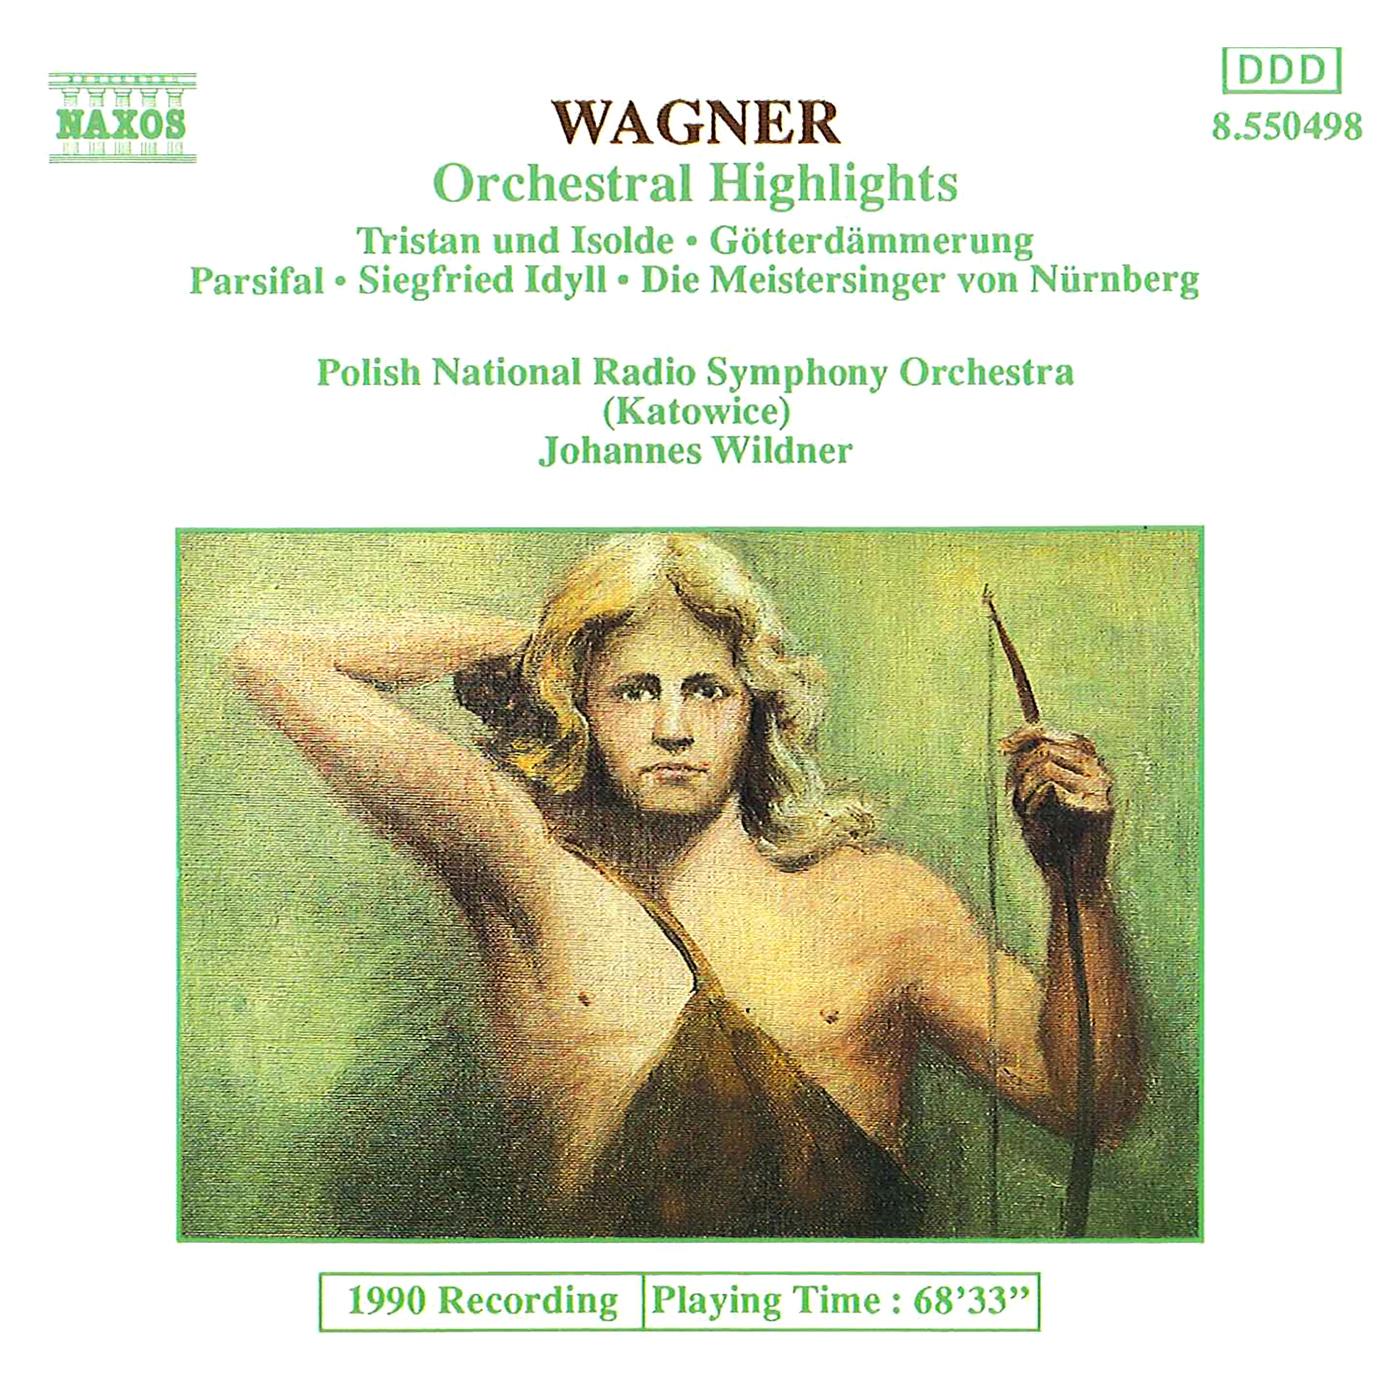 WAGNER, R.: Orchestral Highlights from Operas